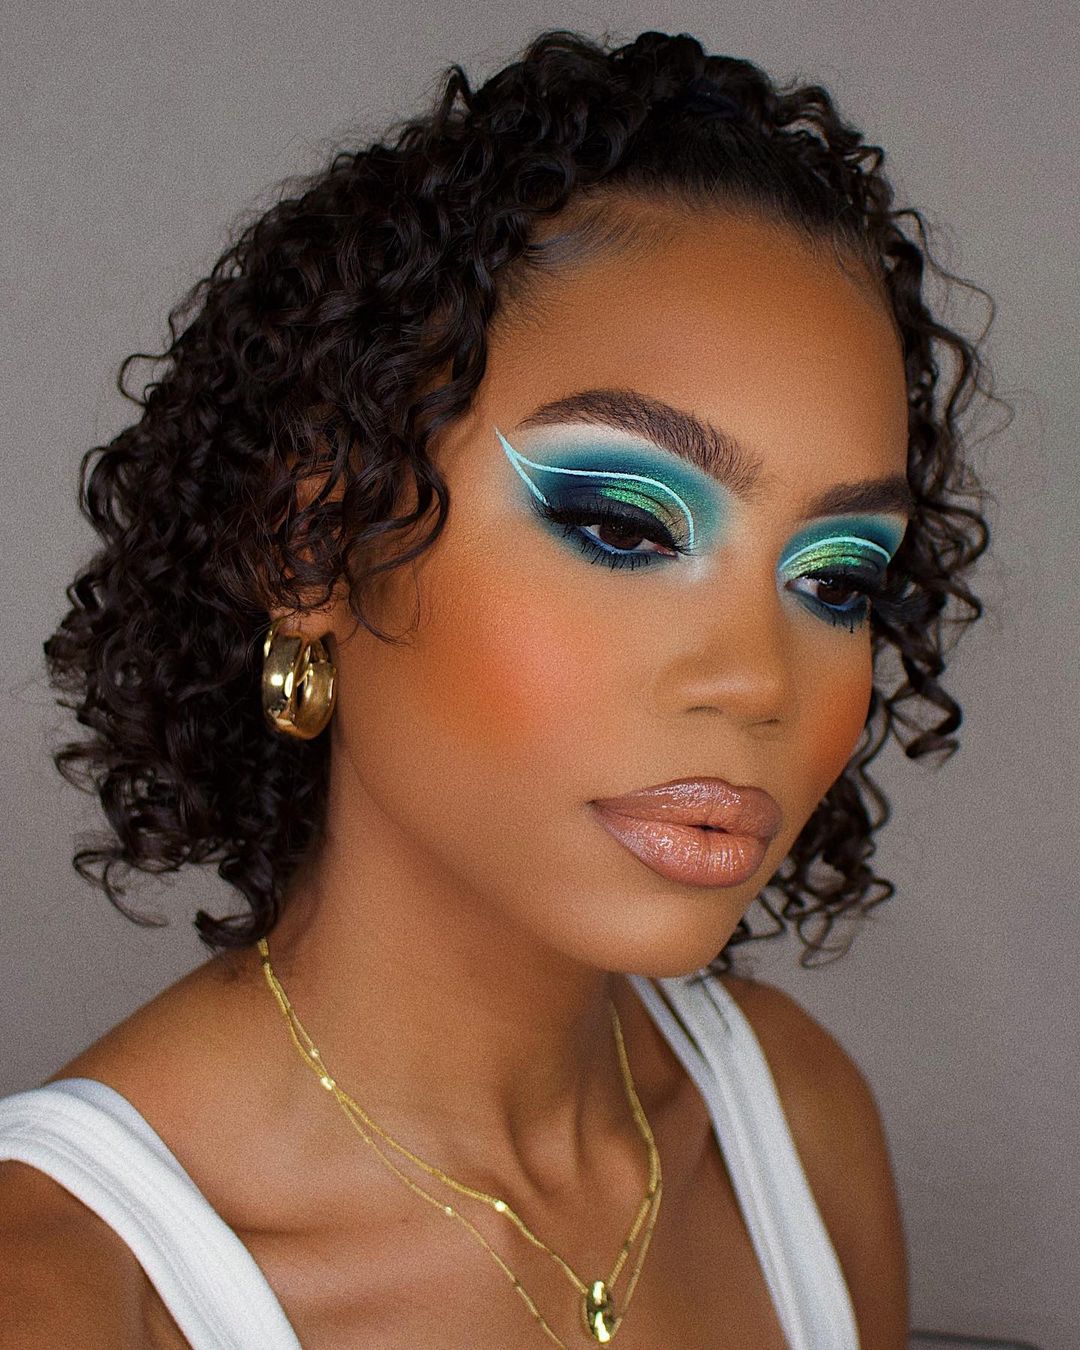 Sugarpill Cosmetics on Twitter: "Talk about adding a little ✨spice✨ 🥵 @tashjanecollins looks gorgeous in our Flora loose eyeshadow 🌼 This shiny chartreuse will become your fave way transform your